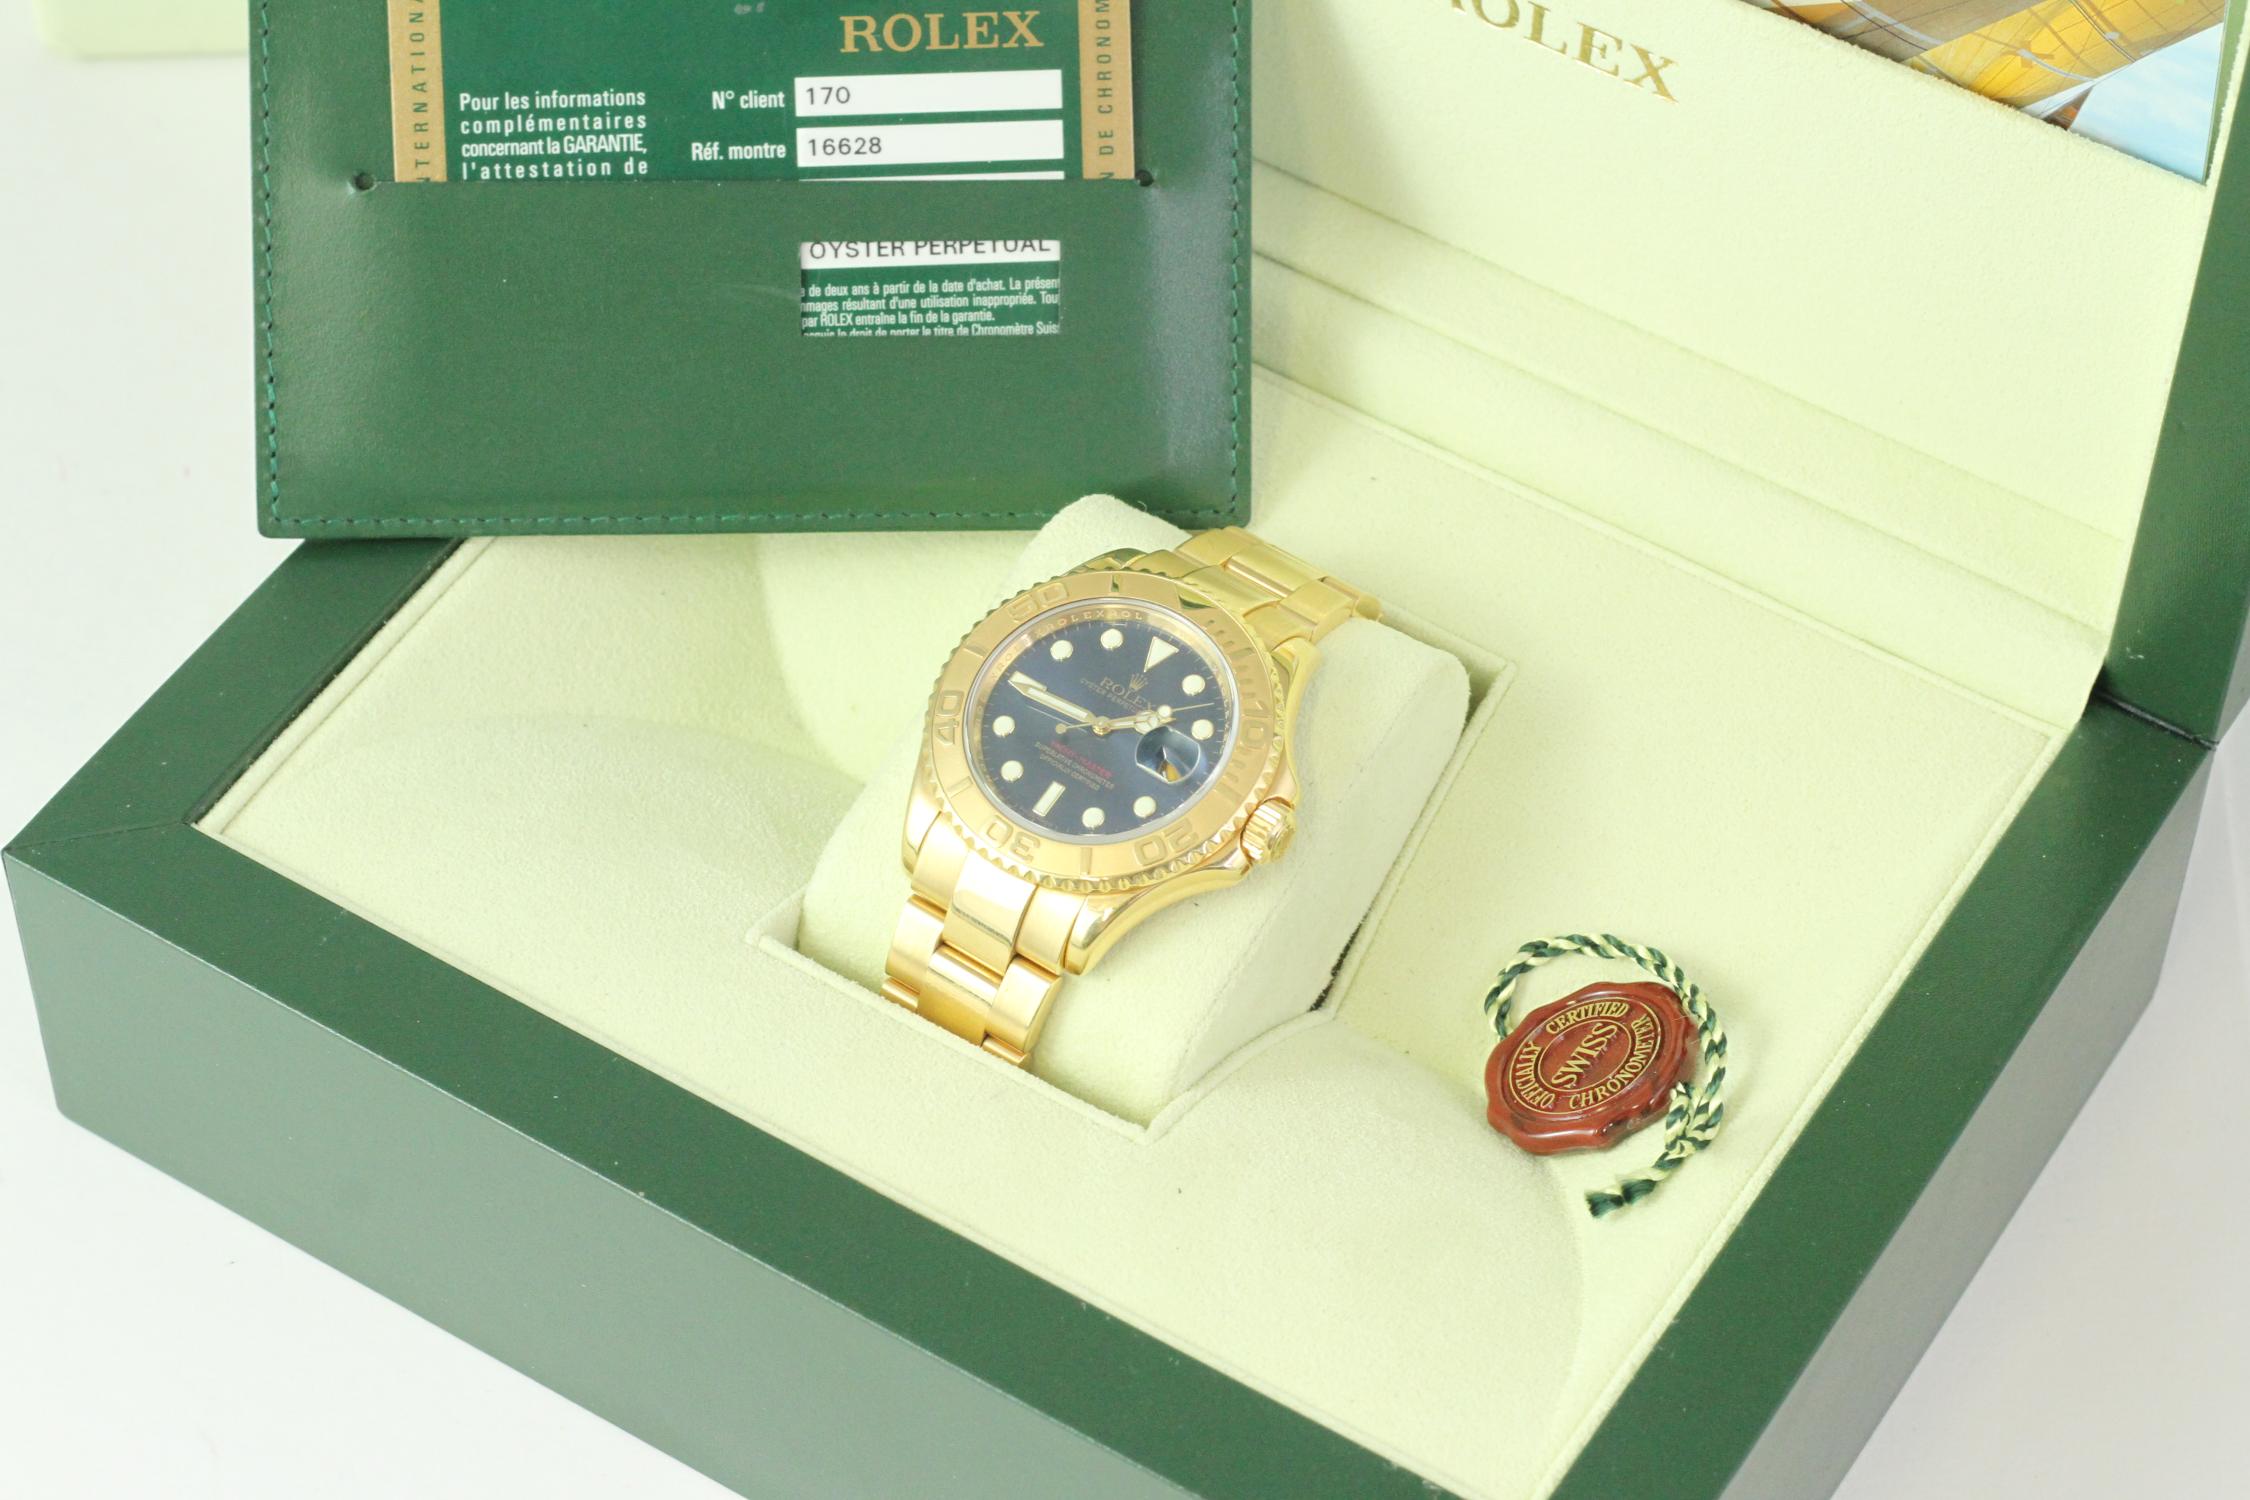 18CT GOLD ROLEX YACHT-MASTER 16628 WITH BOX AND PAPERS 2008 - Image 2 of 12